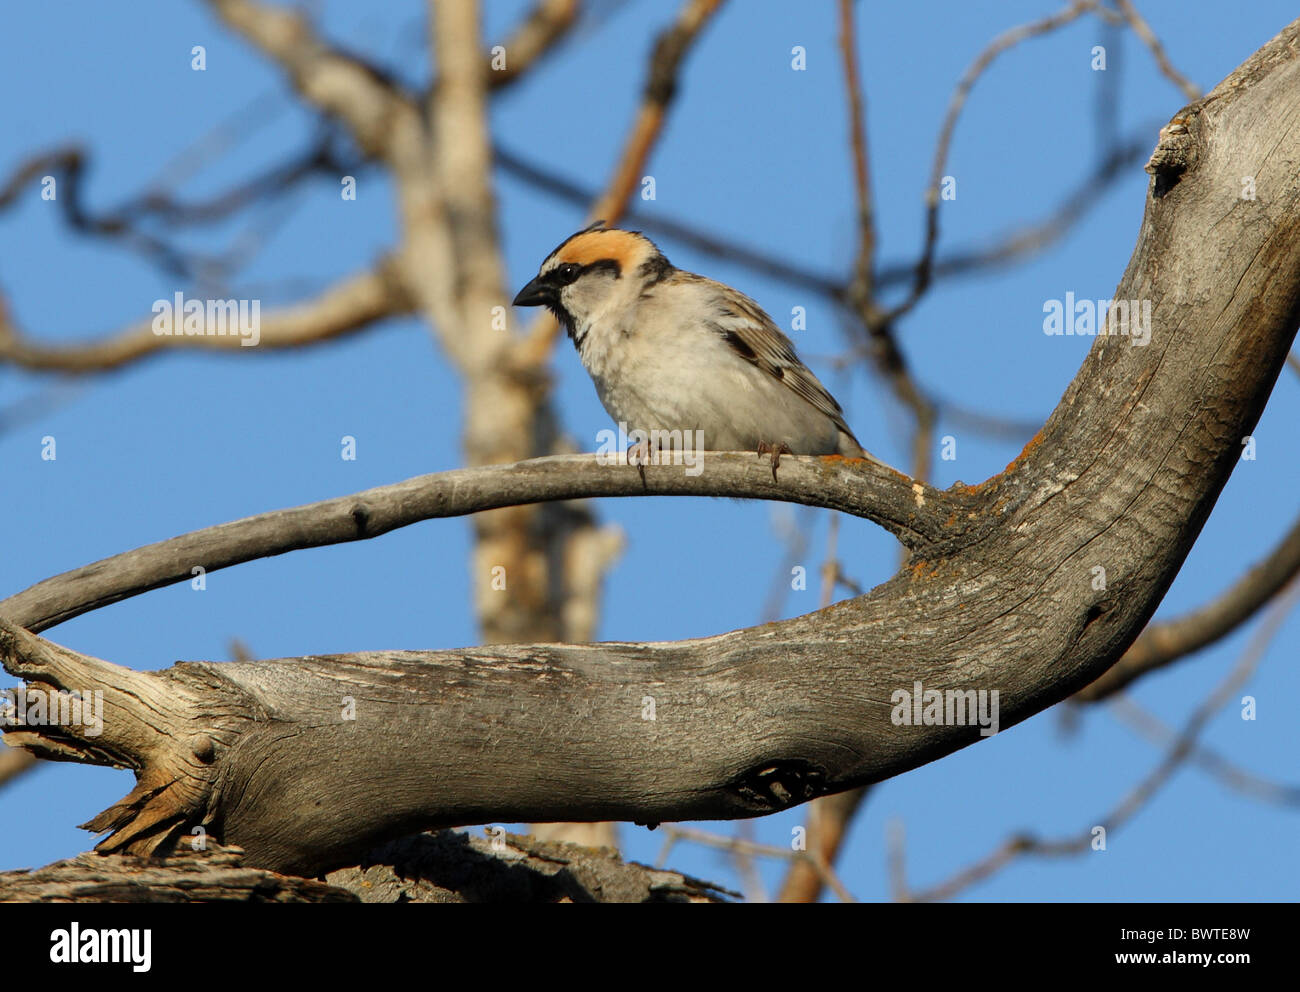 Saxaul Sparrow (Passer ammodendri nigricans) adult, perched in dead tree, Almaty Province, Kazakhstan, june Stock Photo